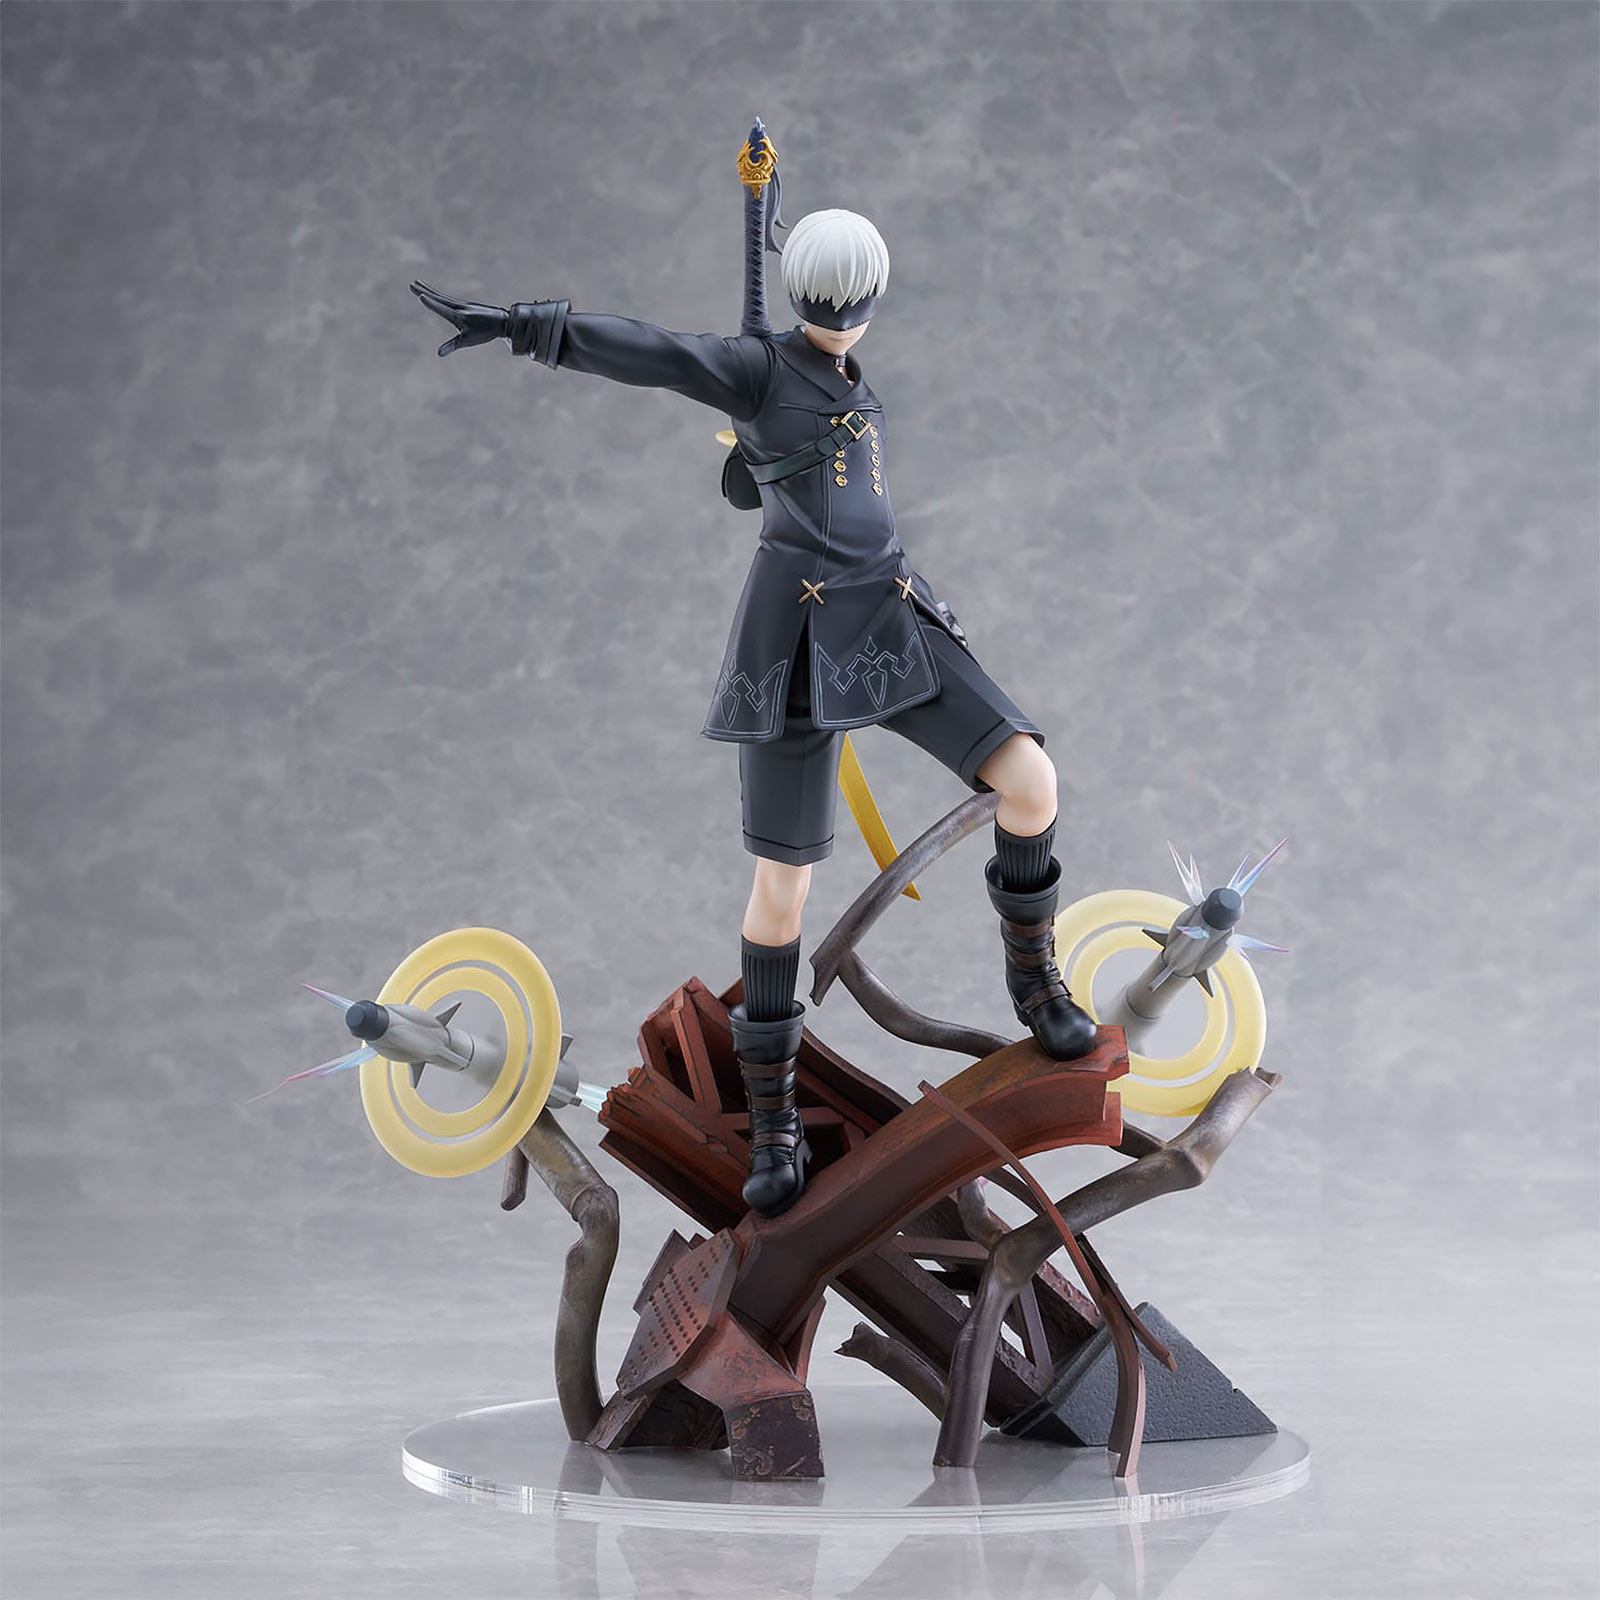 NieR:Automata Ver1.1a - YoRHa No. 9 Type S Covering Fire Statue 1:7